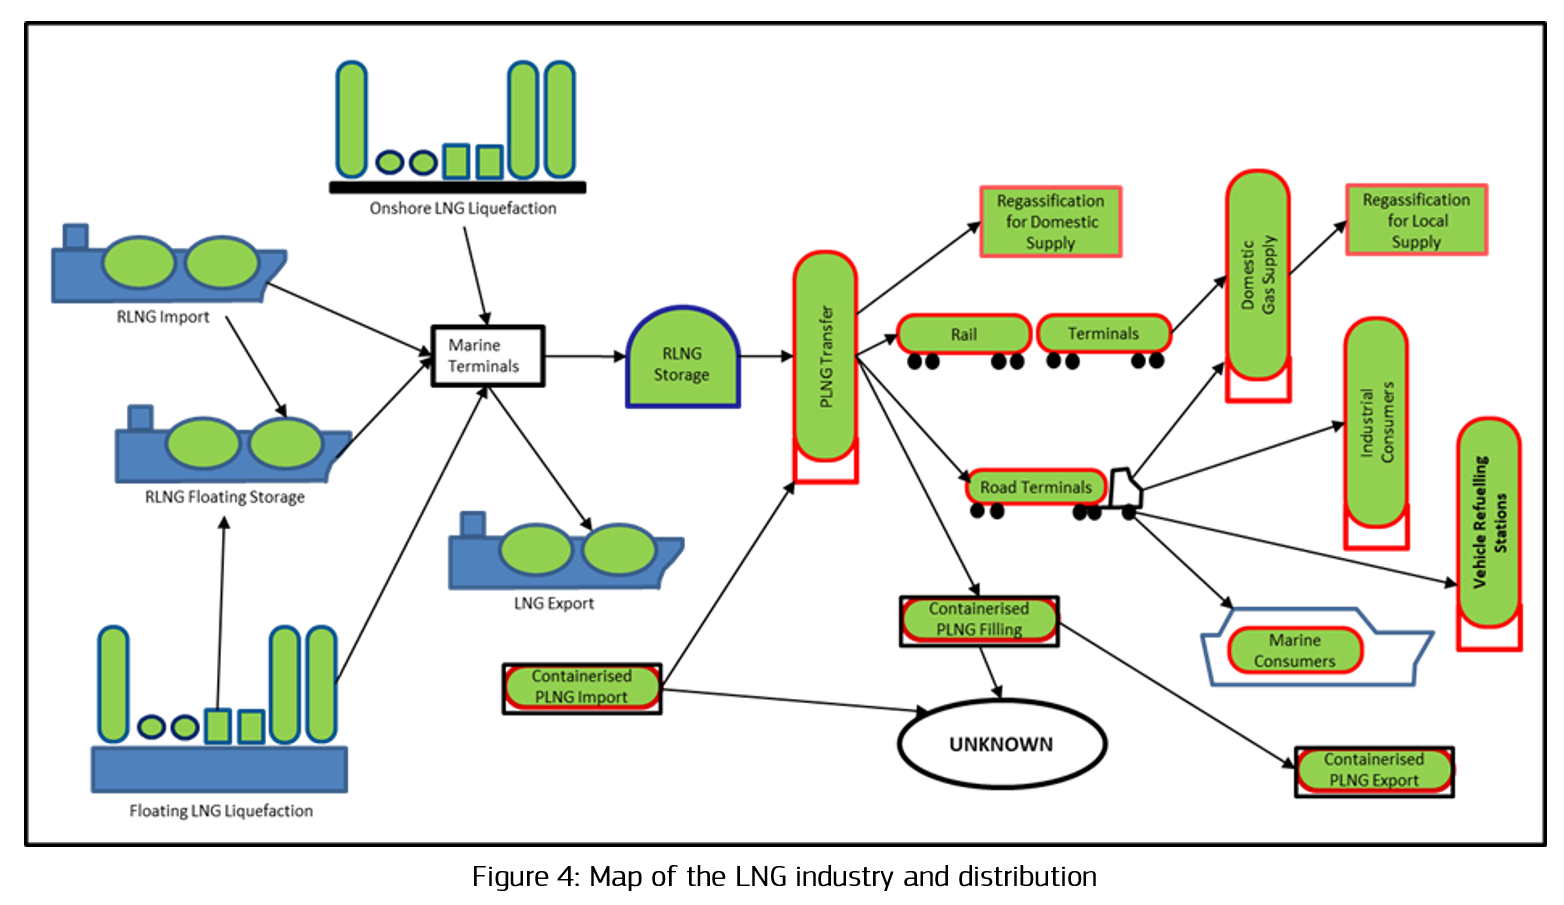 Figure 4: Map of the LNG industry and distribution